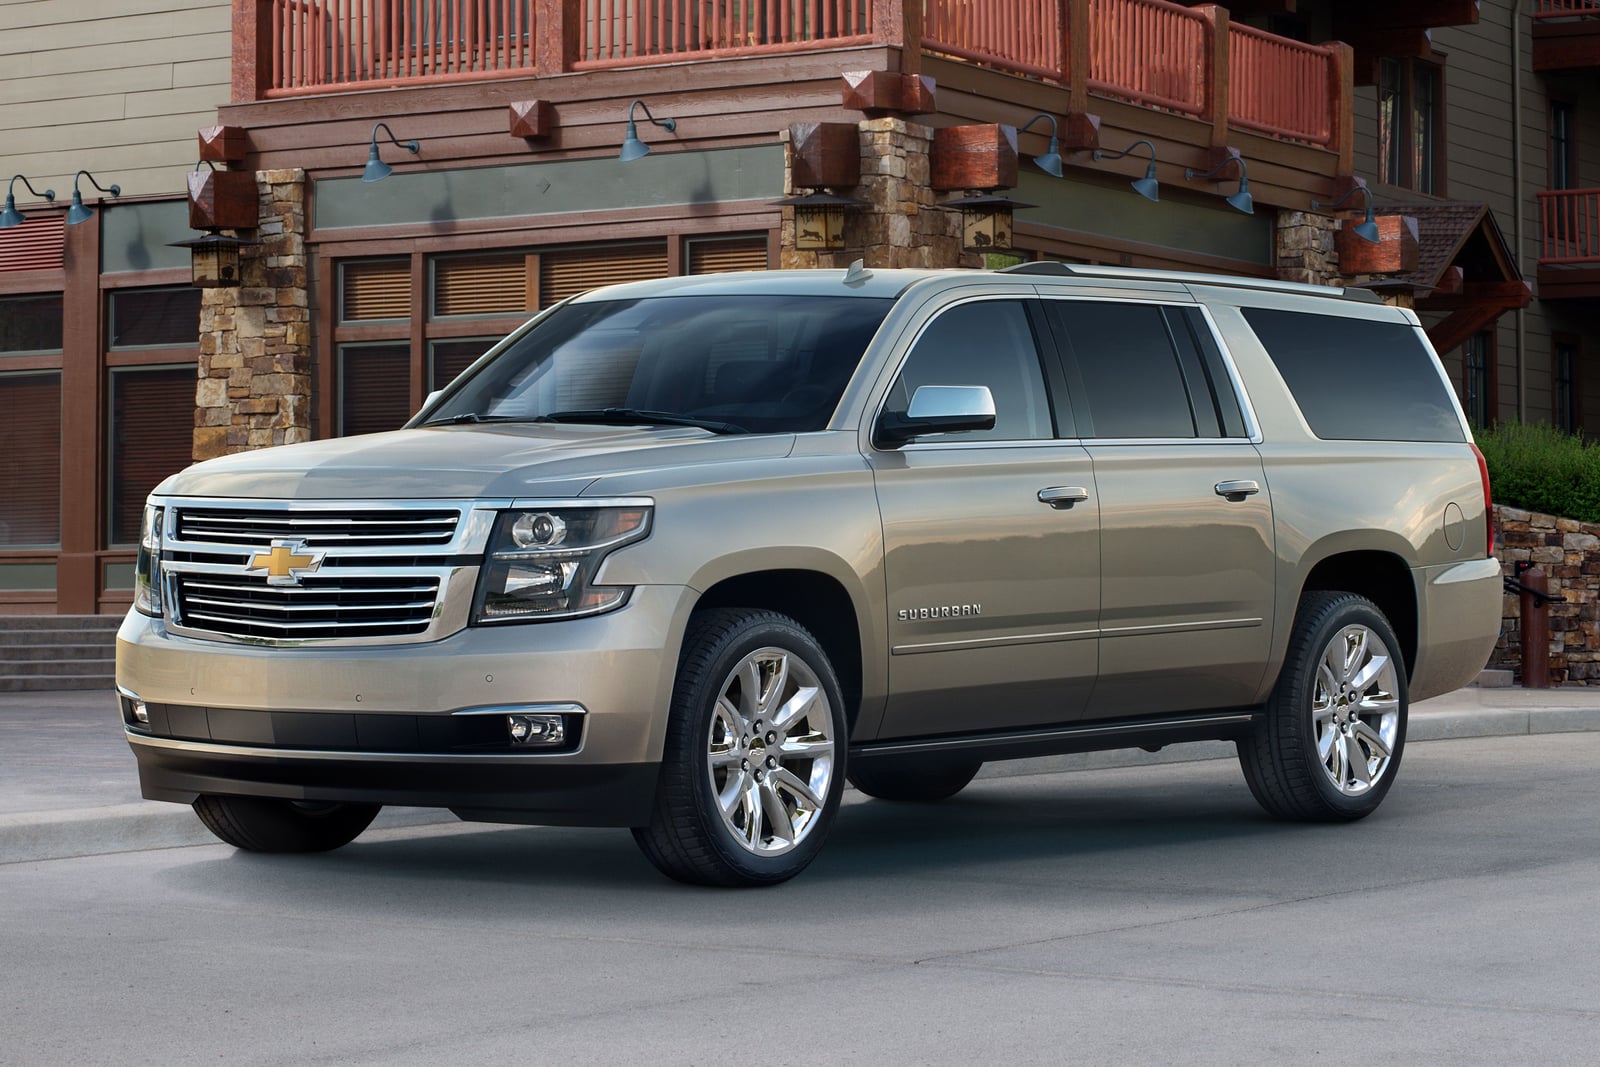 2019 Chevrolet Suburban Deals, Prices, Incentives \u0026 Leases, Overview  CarsDirect